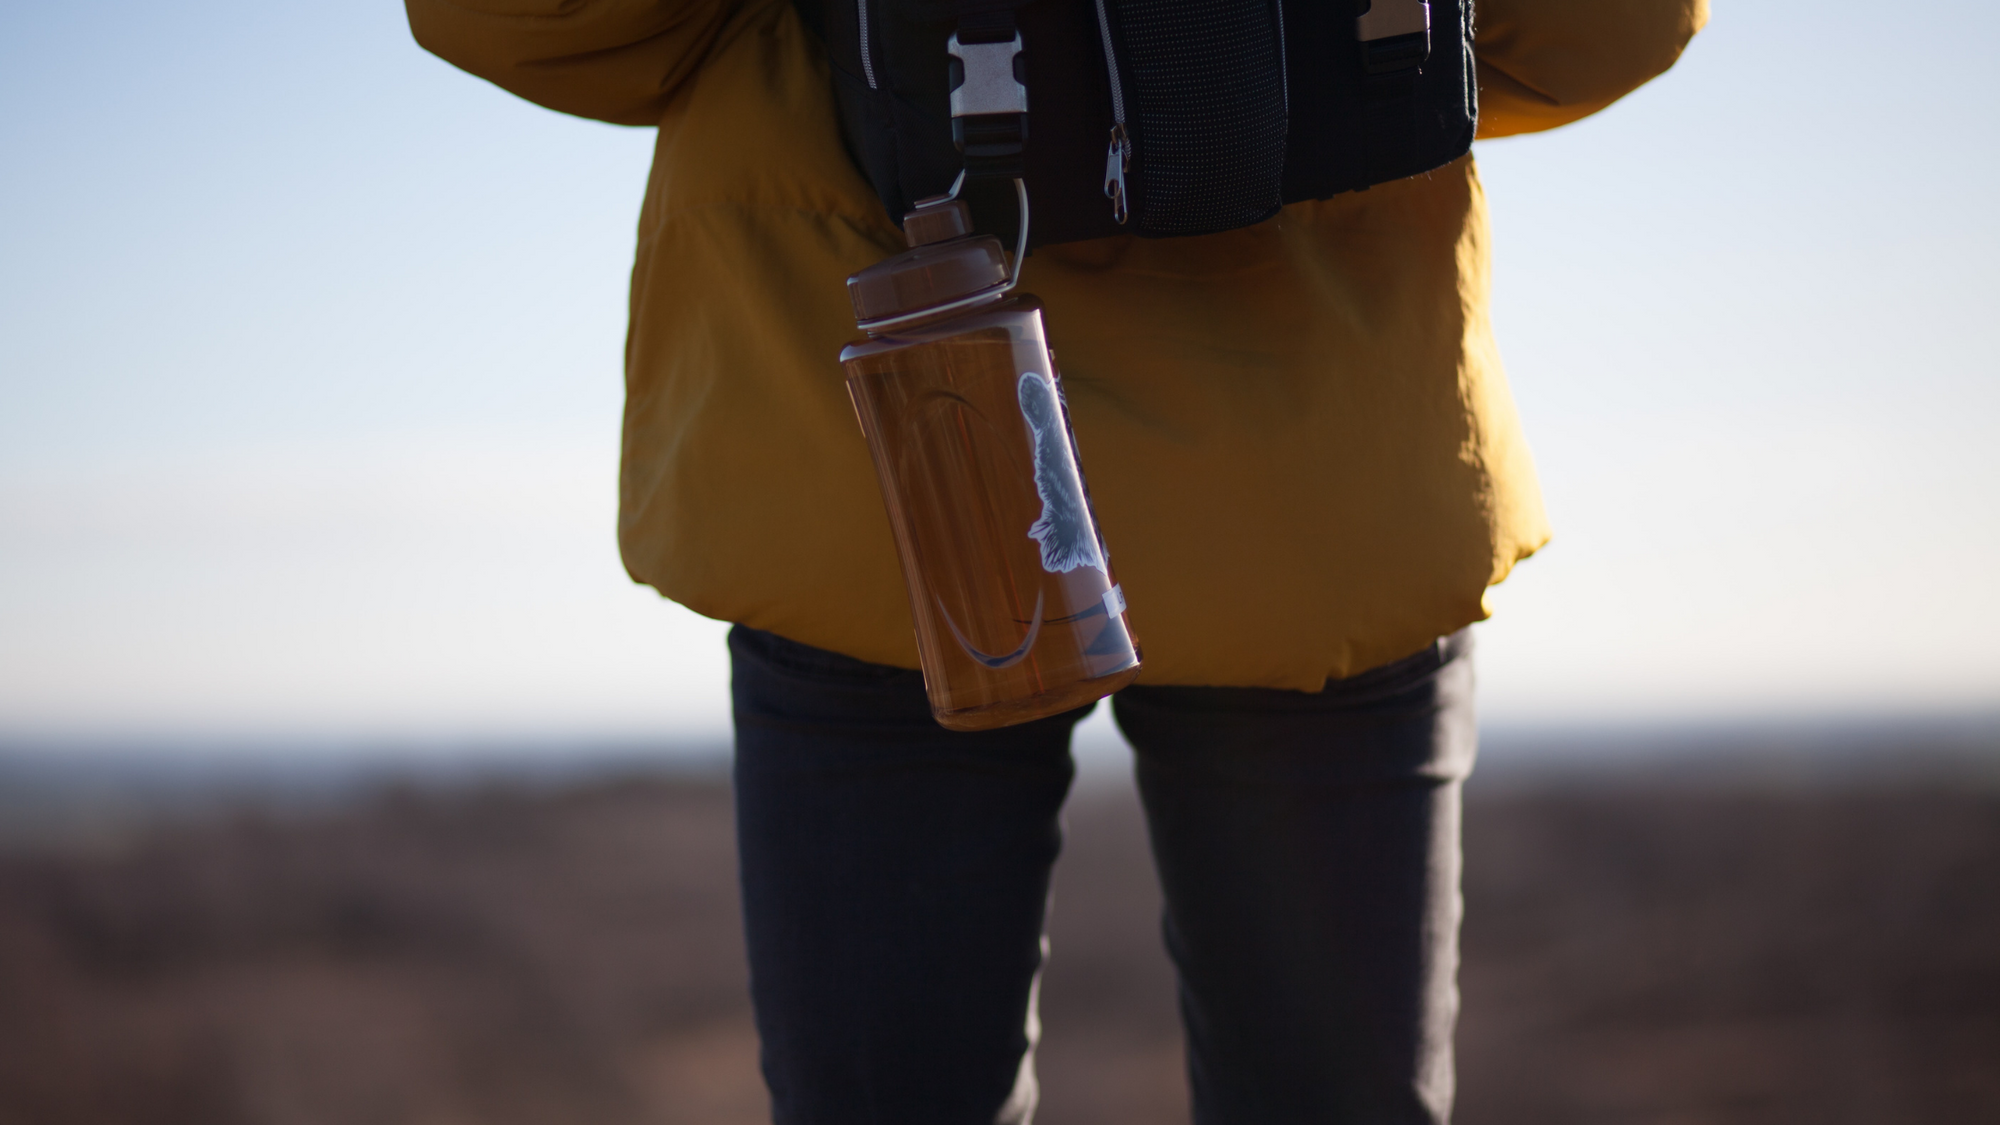 5 OUTDOOR WINTER HYDRATION TIPS